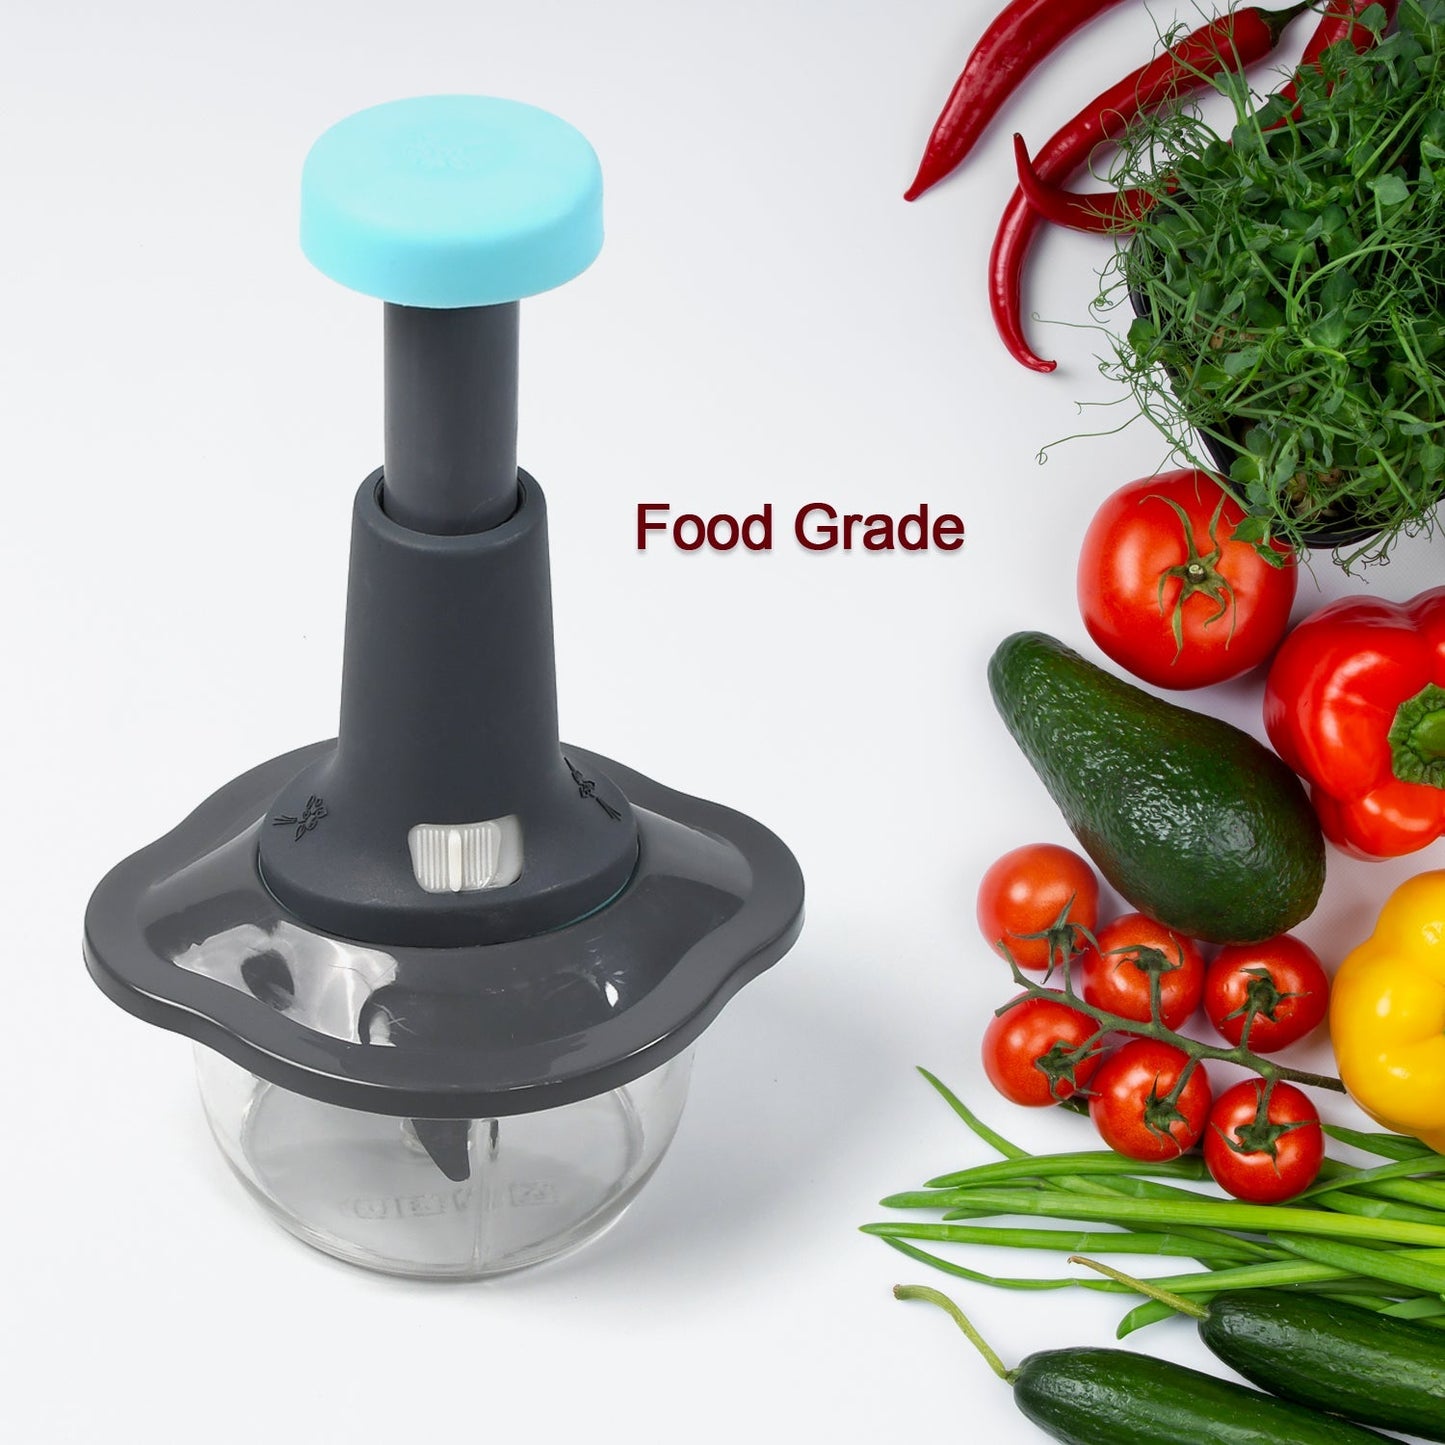 5329  Push Chopper Manual Food Chopper and Hand Push Vegetable Chopper, Cutter, Mixer Set for Kitchen with 3 Stainless Steel Blade DeoDap